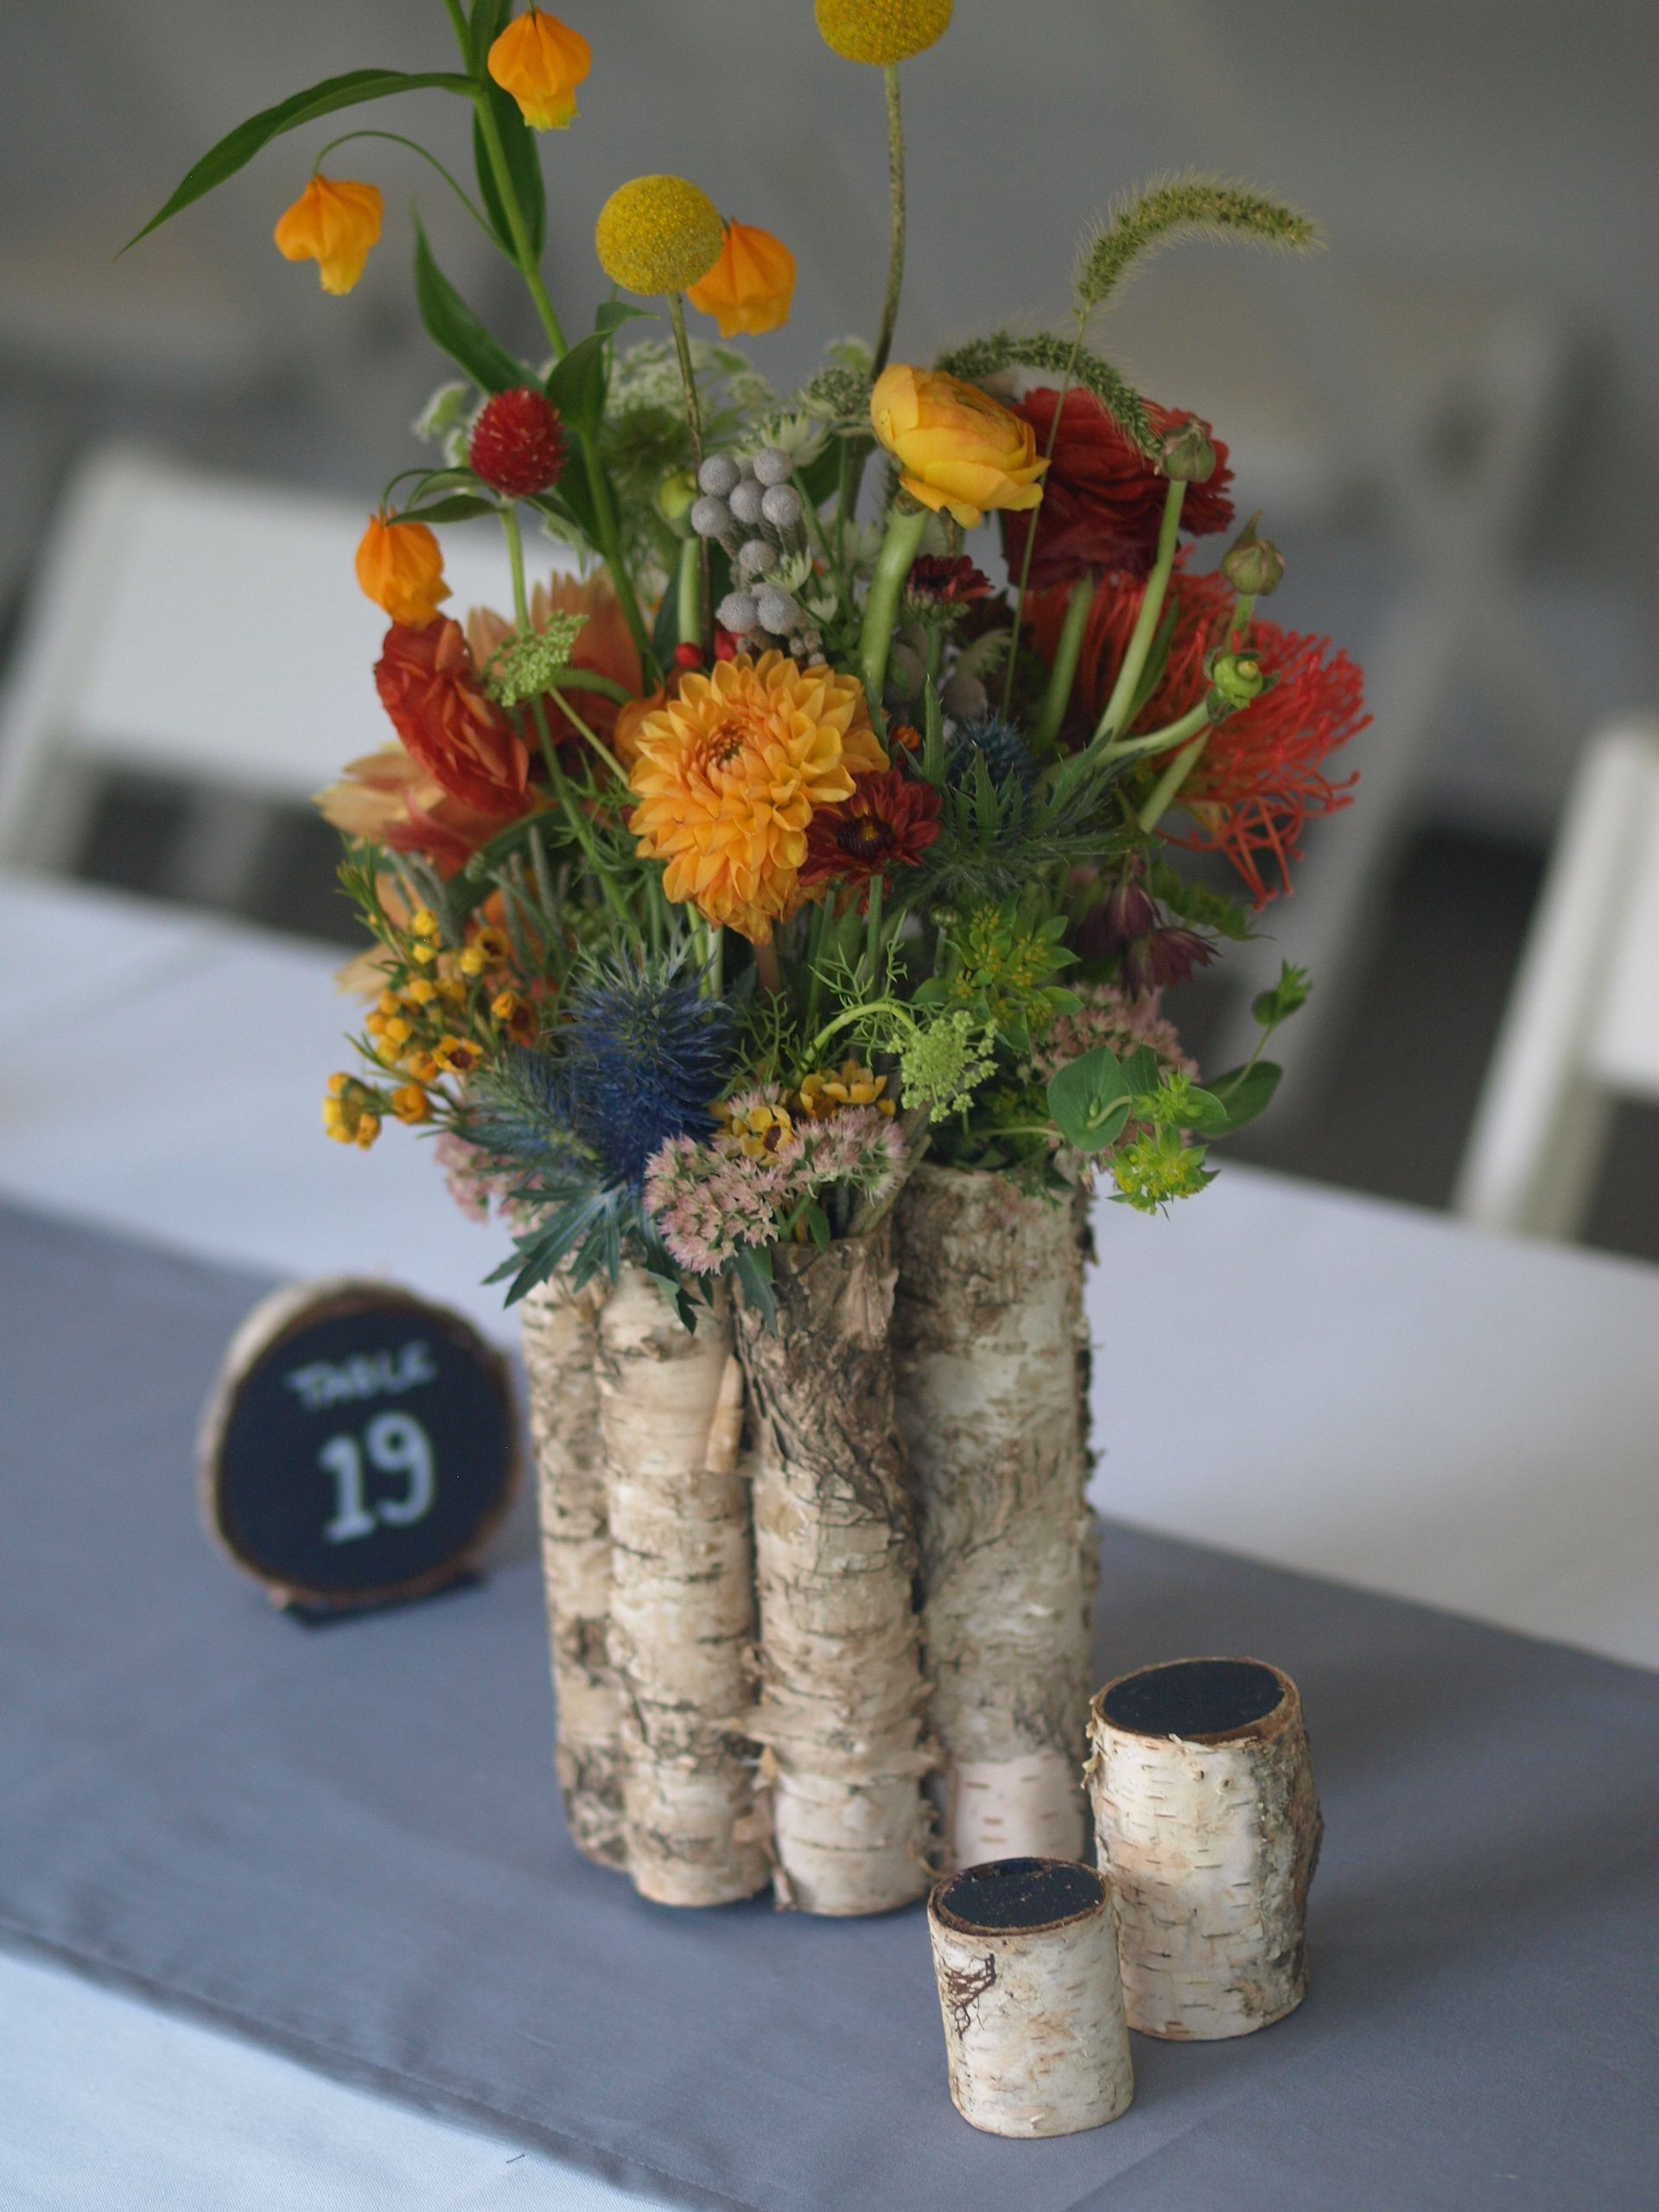 20 Cute Wild Flowers In Vase 2024 free download wild flowers in vase of orange yellow and red centerpiece in birch container accented with in orange yellow and red centerpiece in birch container accented with hand painted table